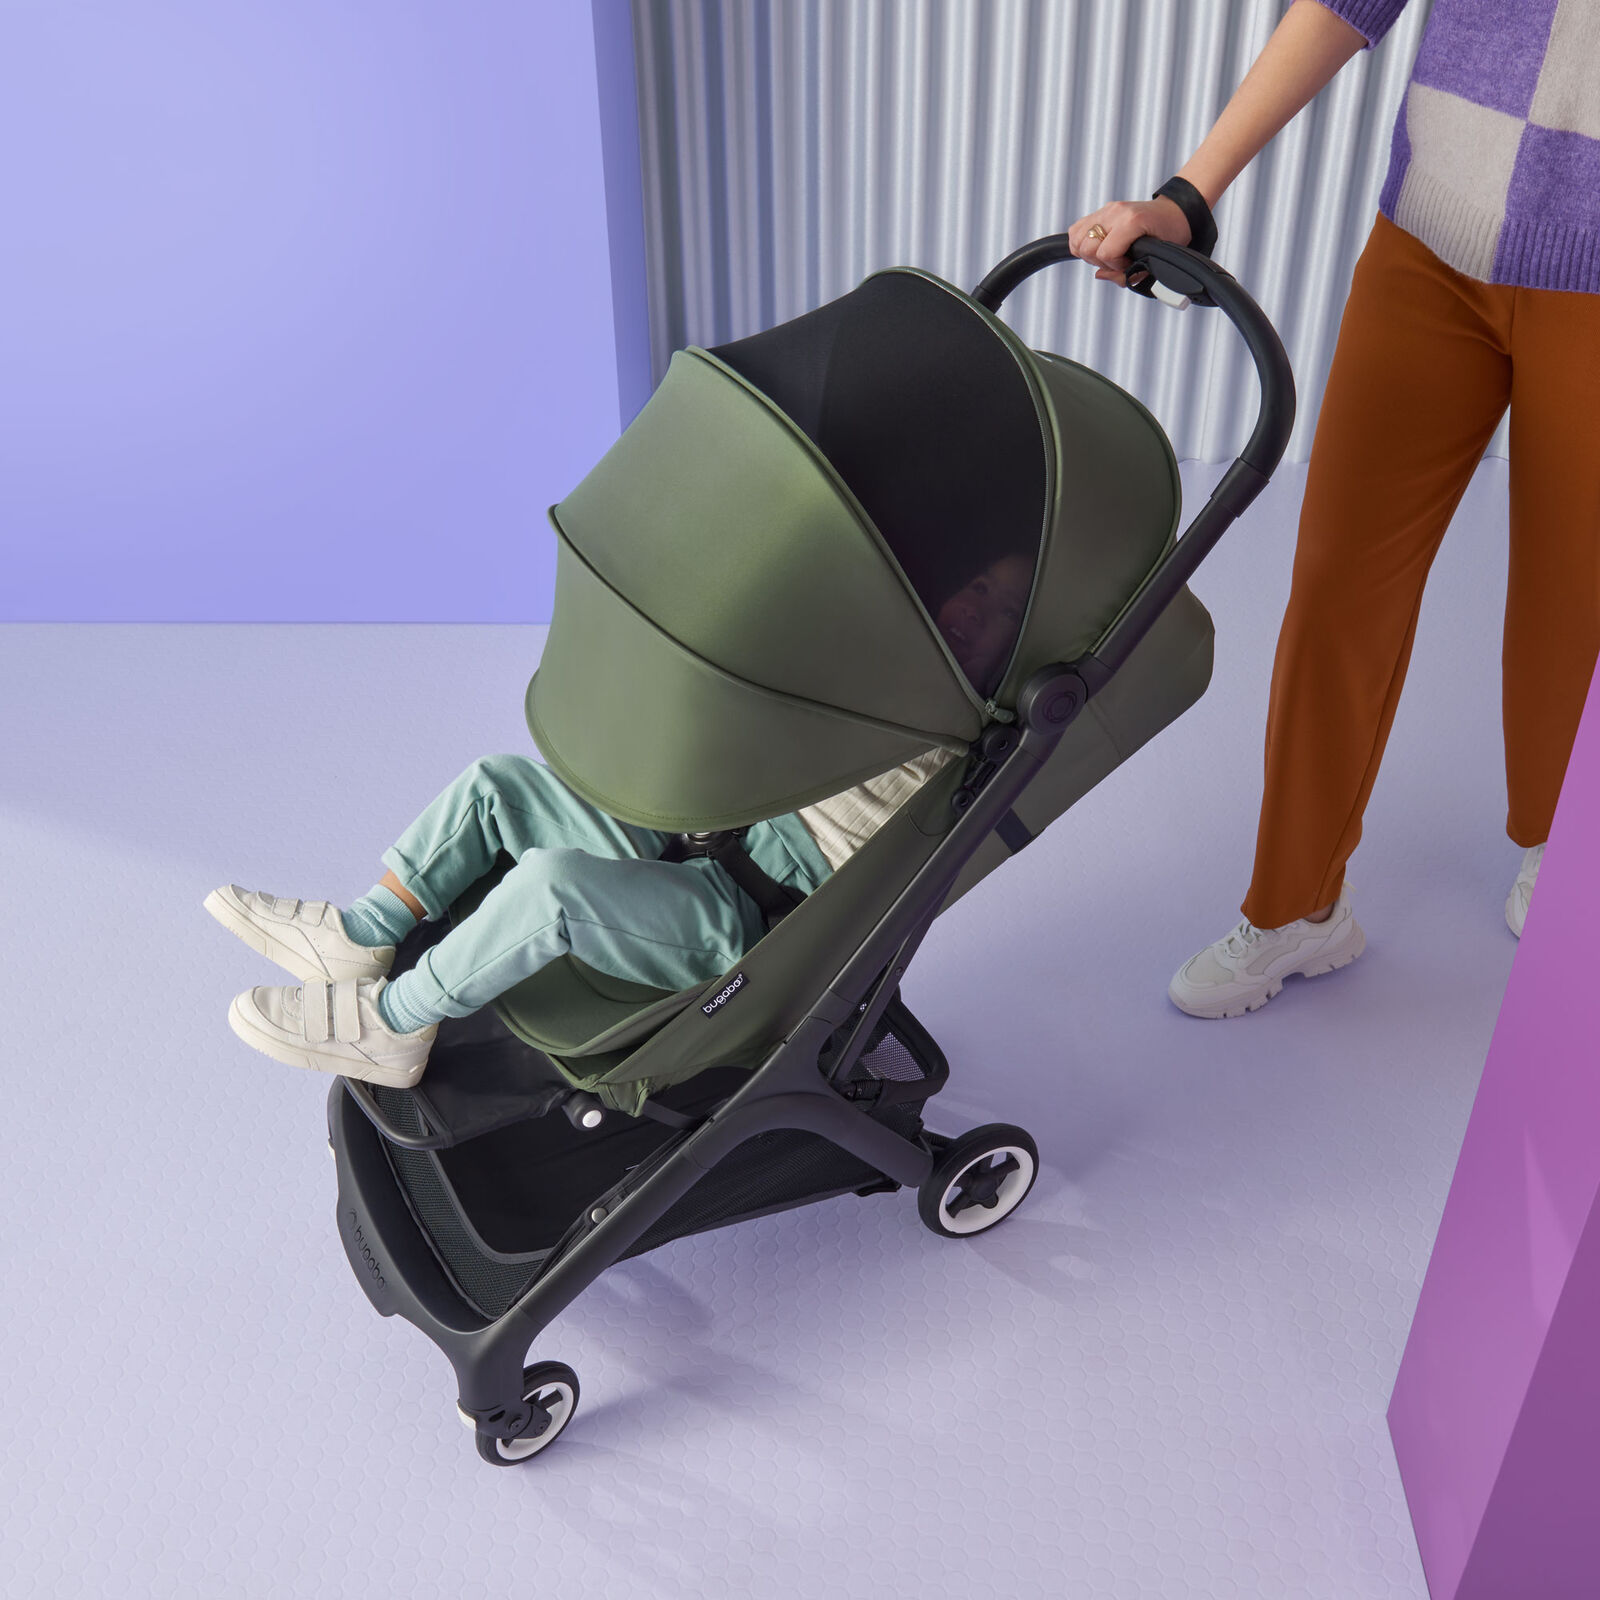 Bugaboo Butterfly seat pram - View 4